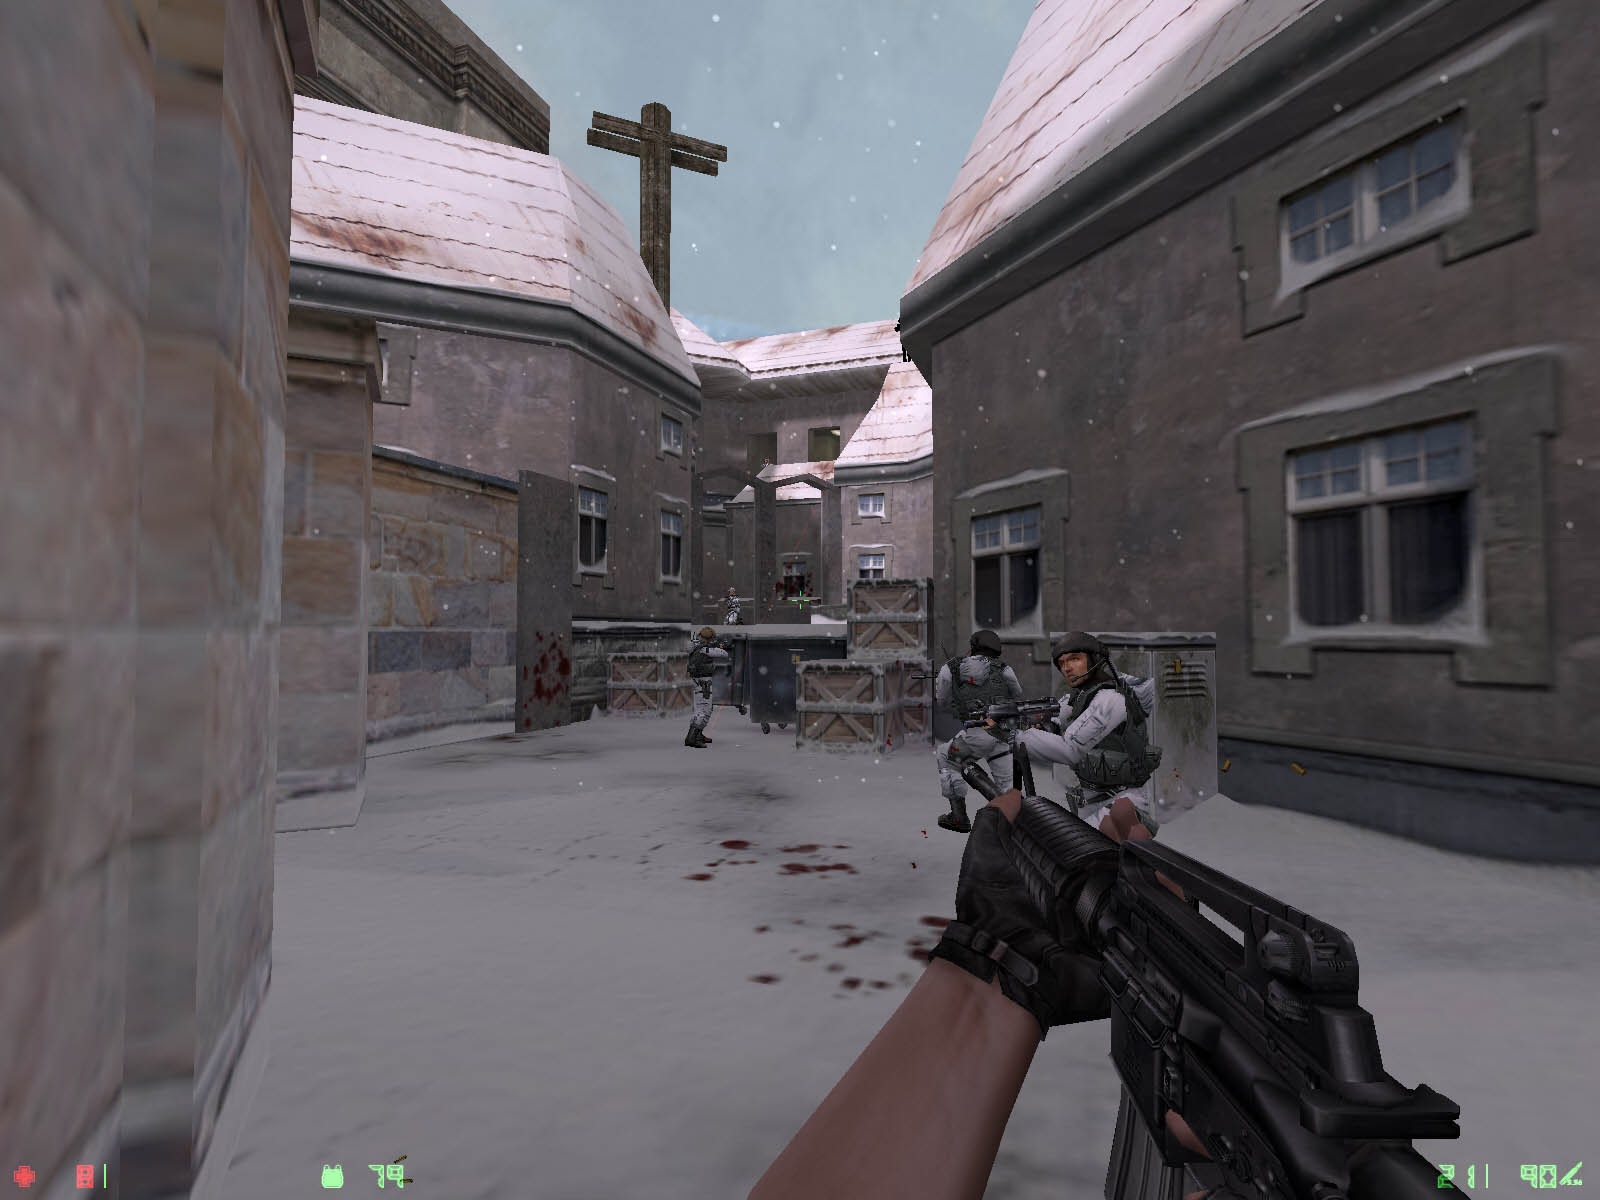 counter strike condition download